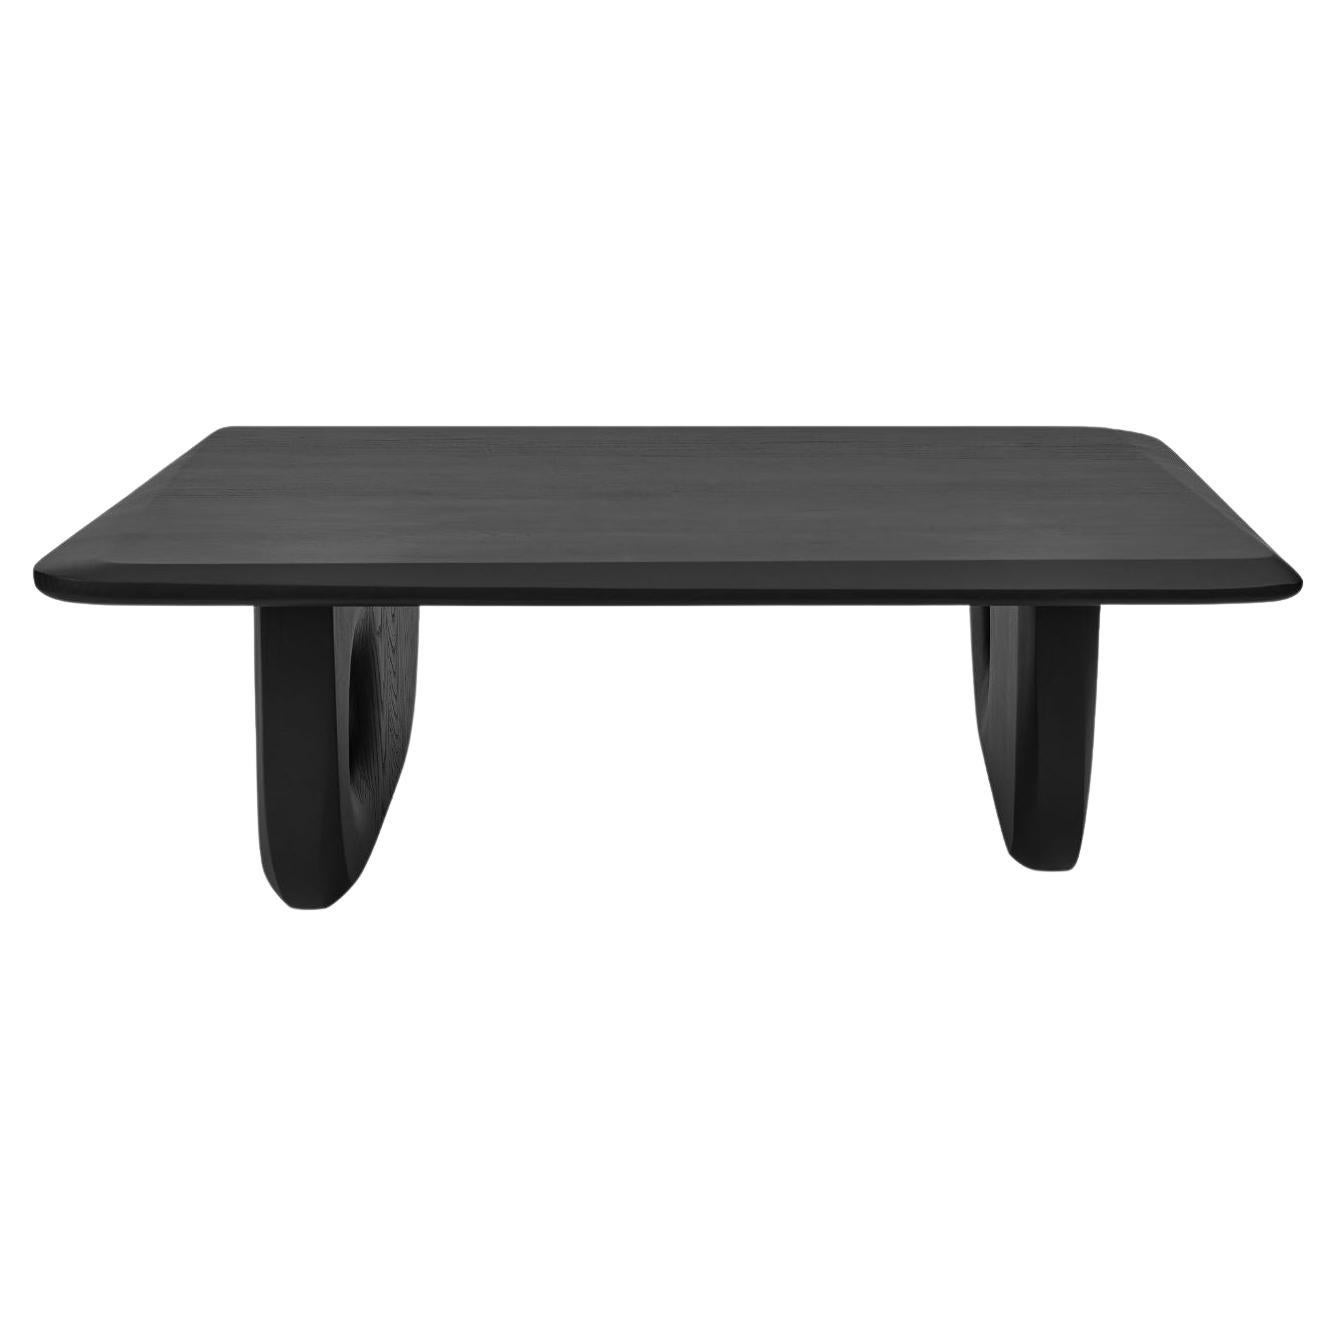 Zomana Low Table M by Contemporary Ecowood For Sale